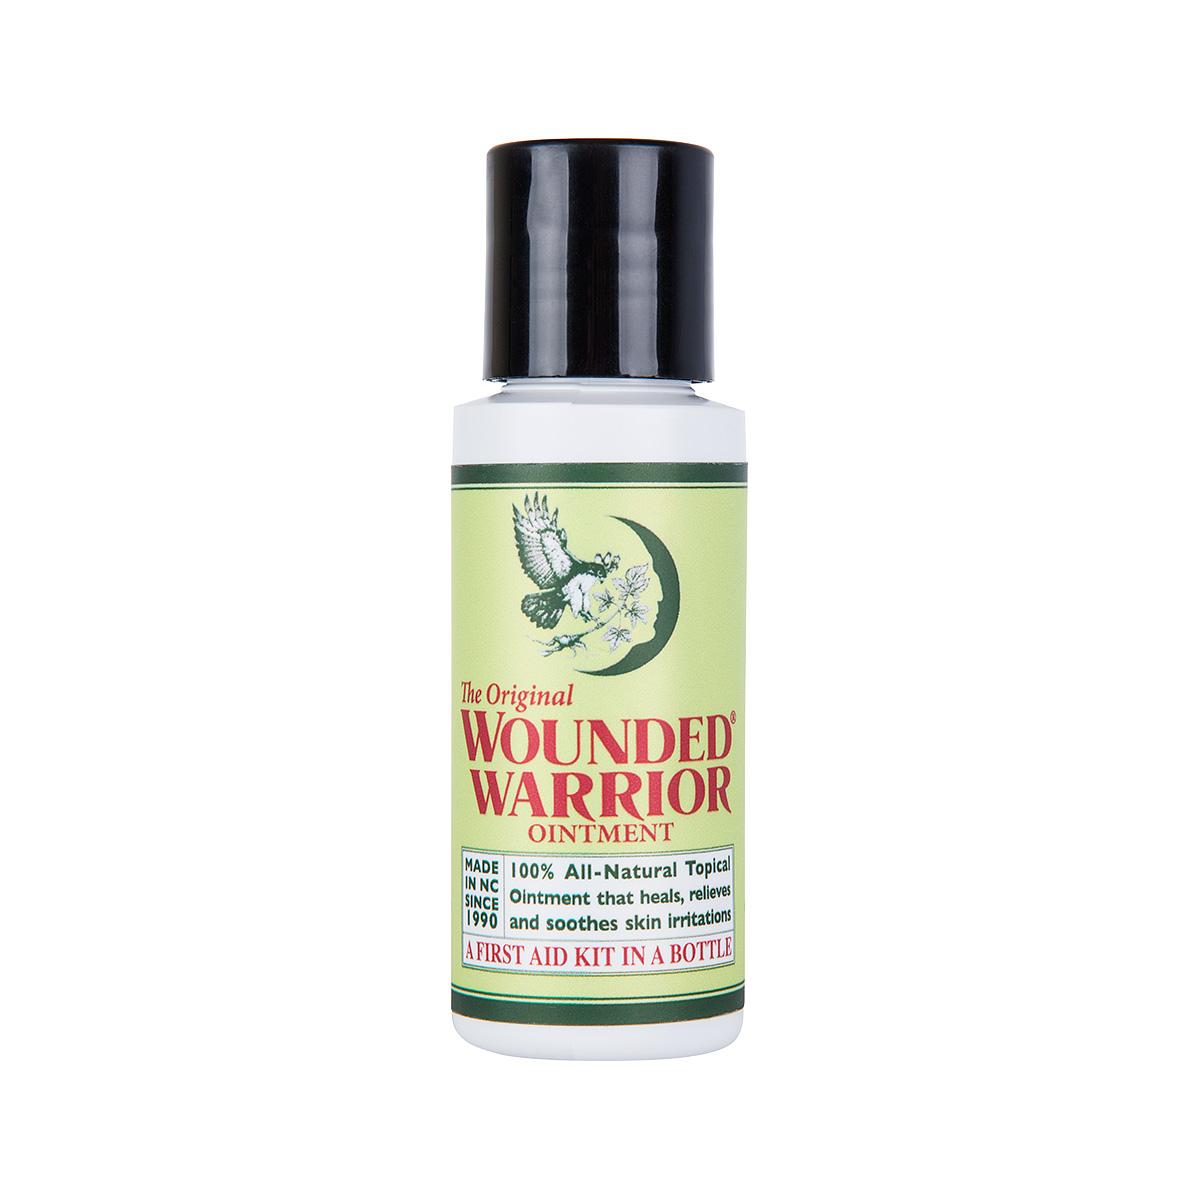  Wounded Warrior Ointment - 2 Ounce